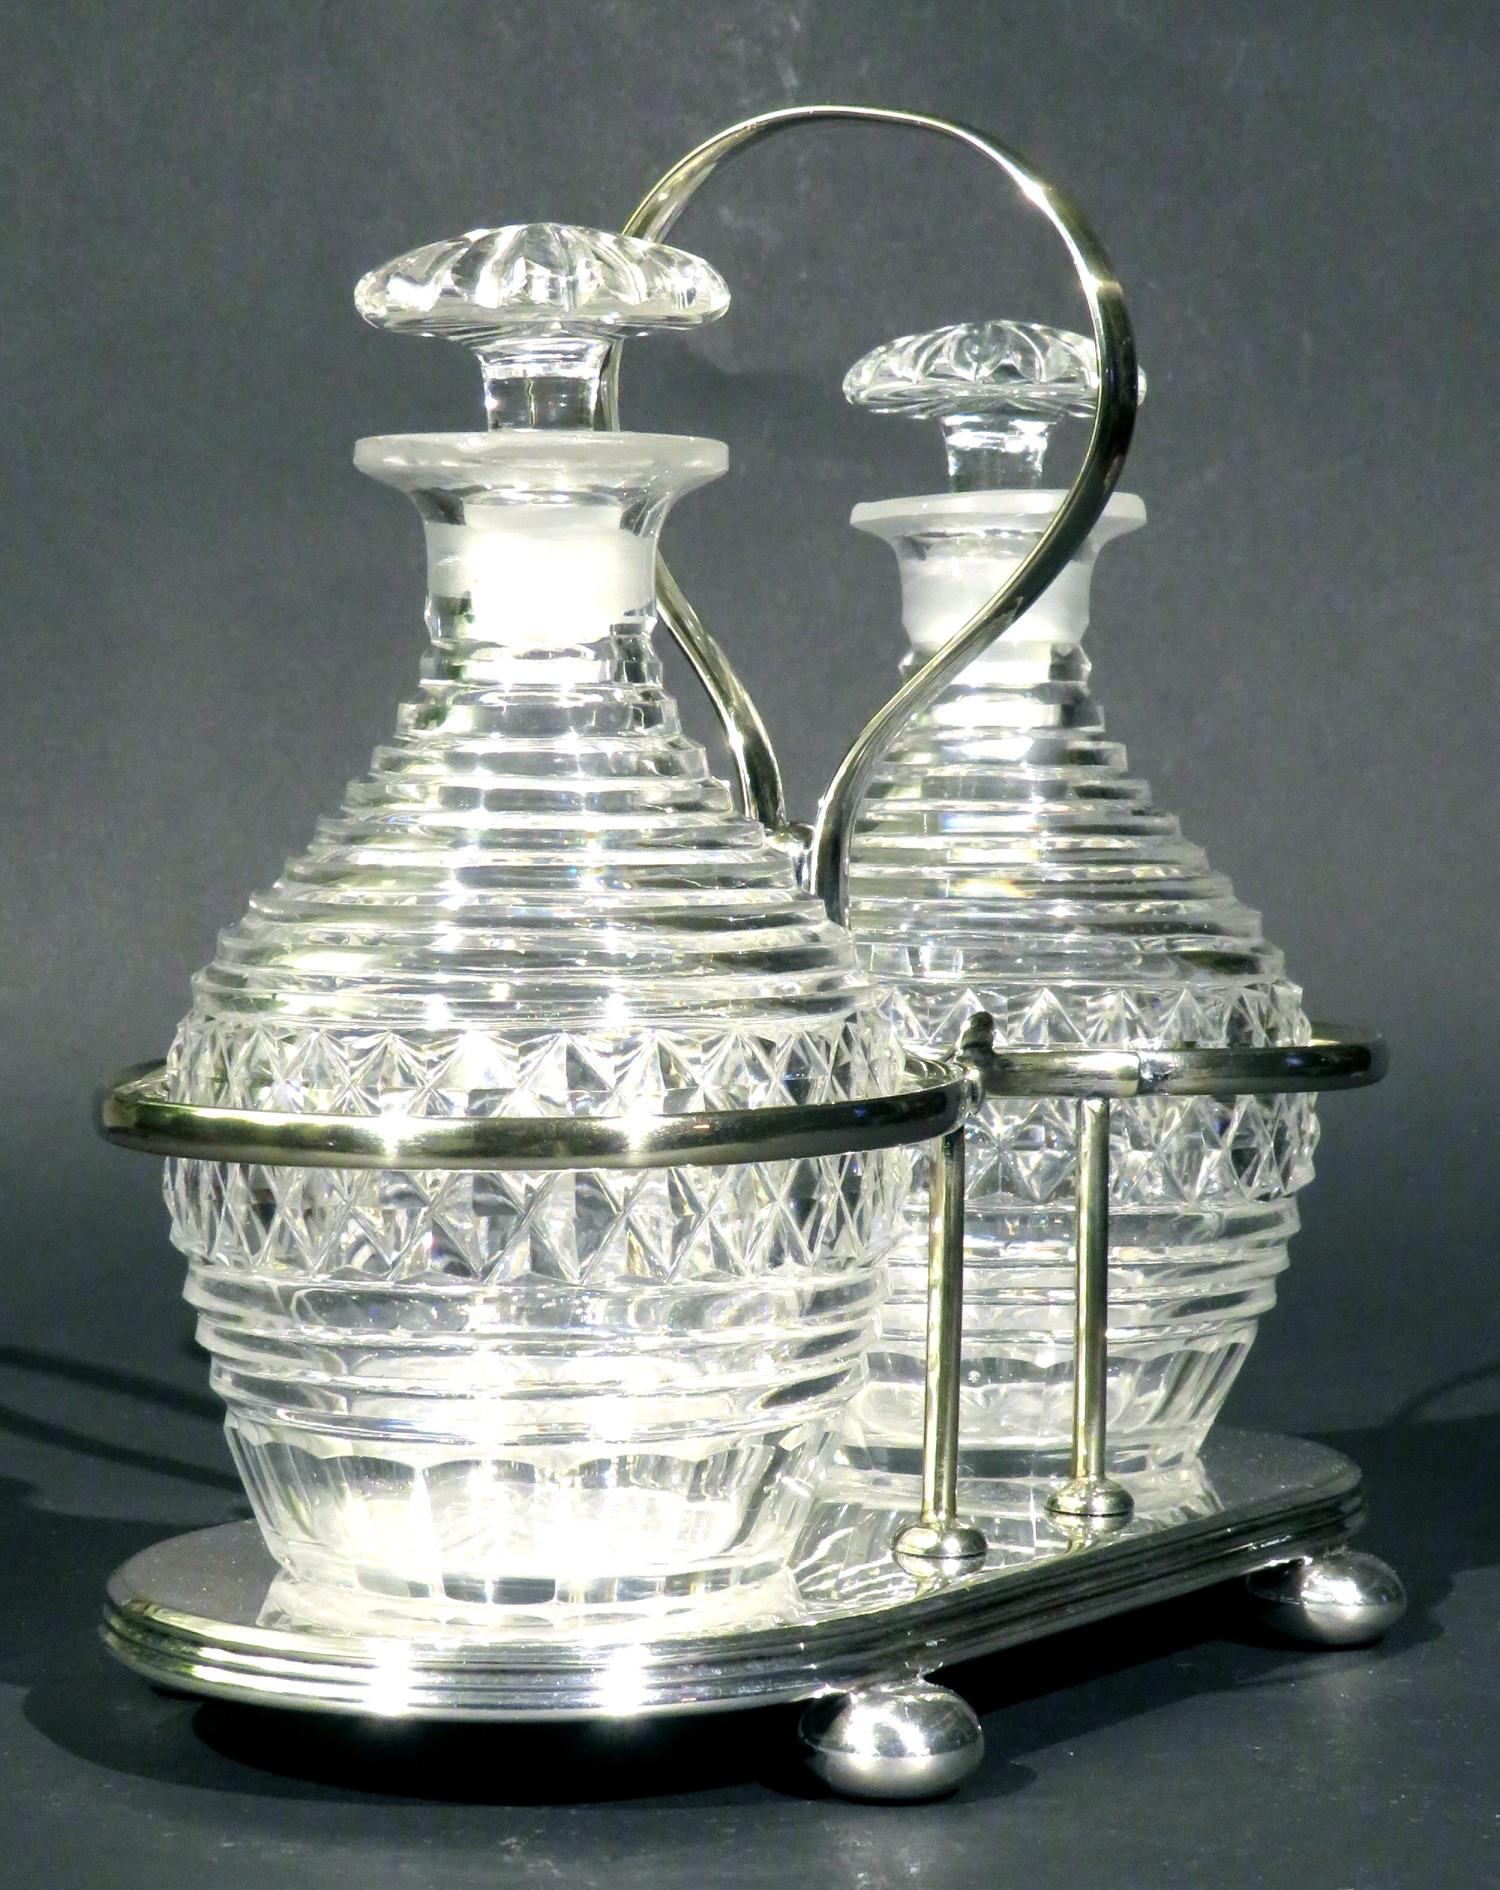 A very handsome pair of early 19th century cut glass spirit decanters, both greyish glass bodies of barrel shape, decorated with a broad band of wheel-cut diamond shaped facets, rising to multi-ringed necks & fitted with their original radial cut